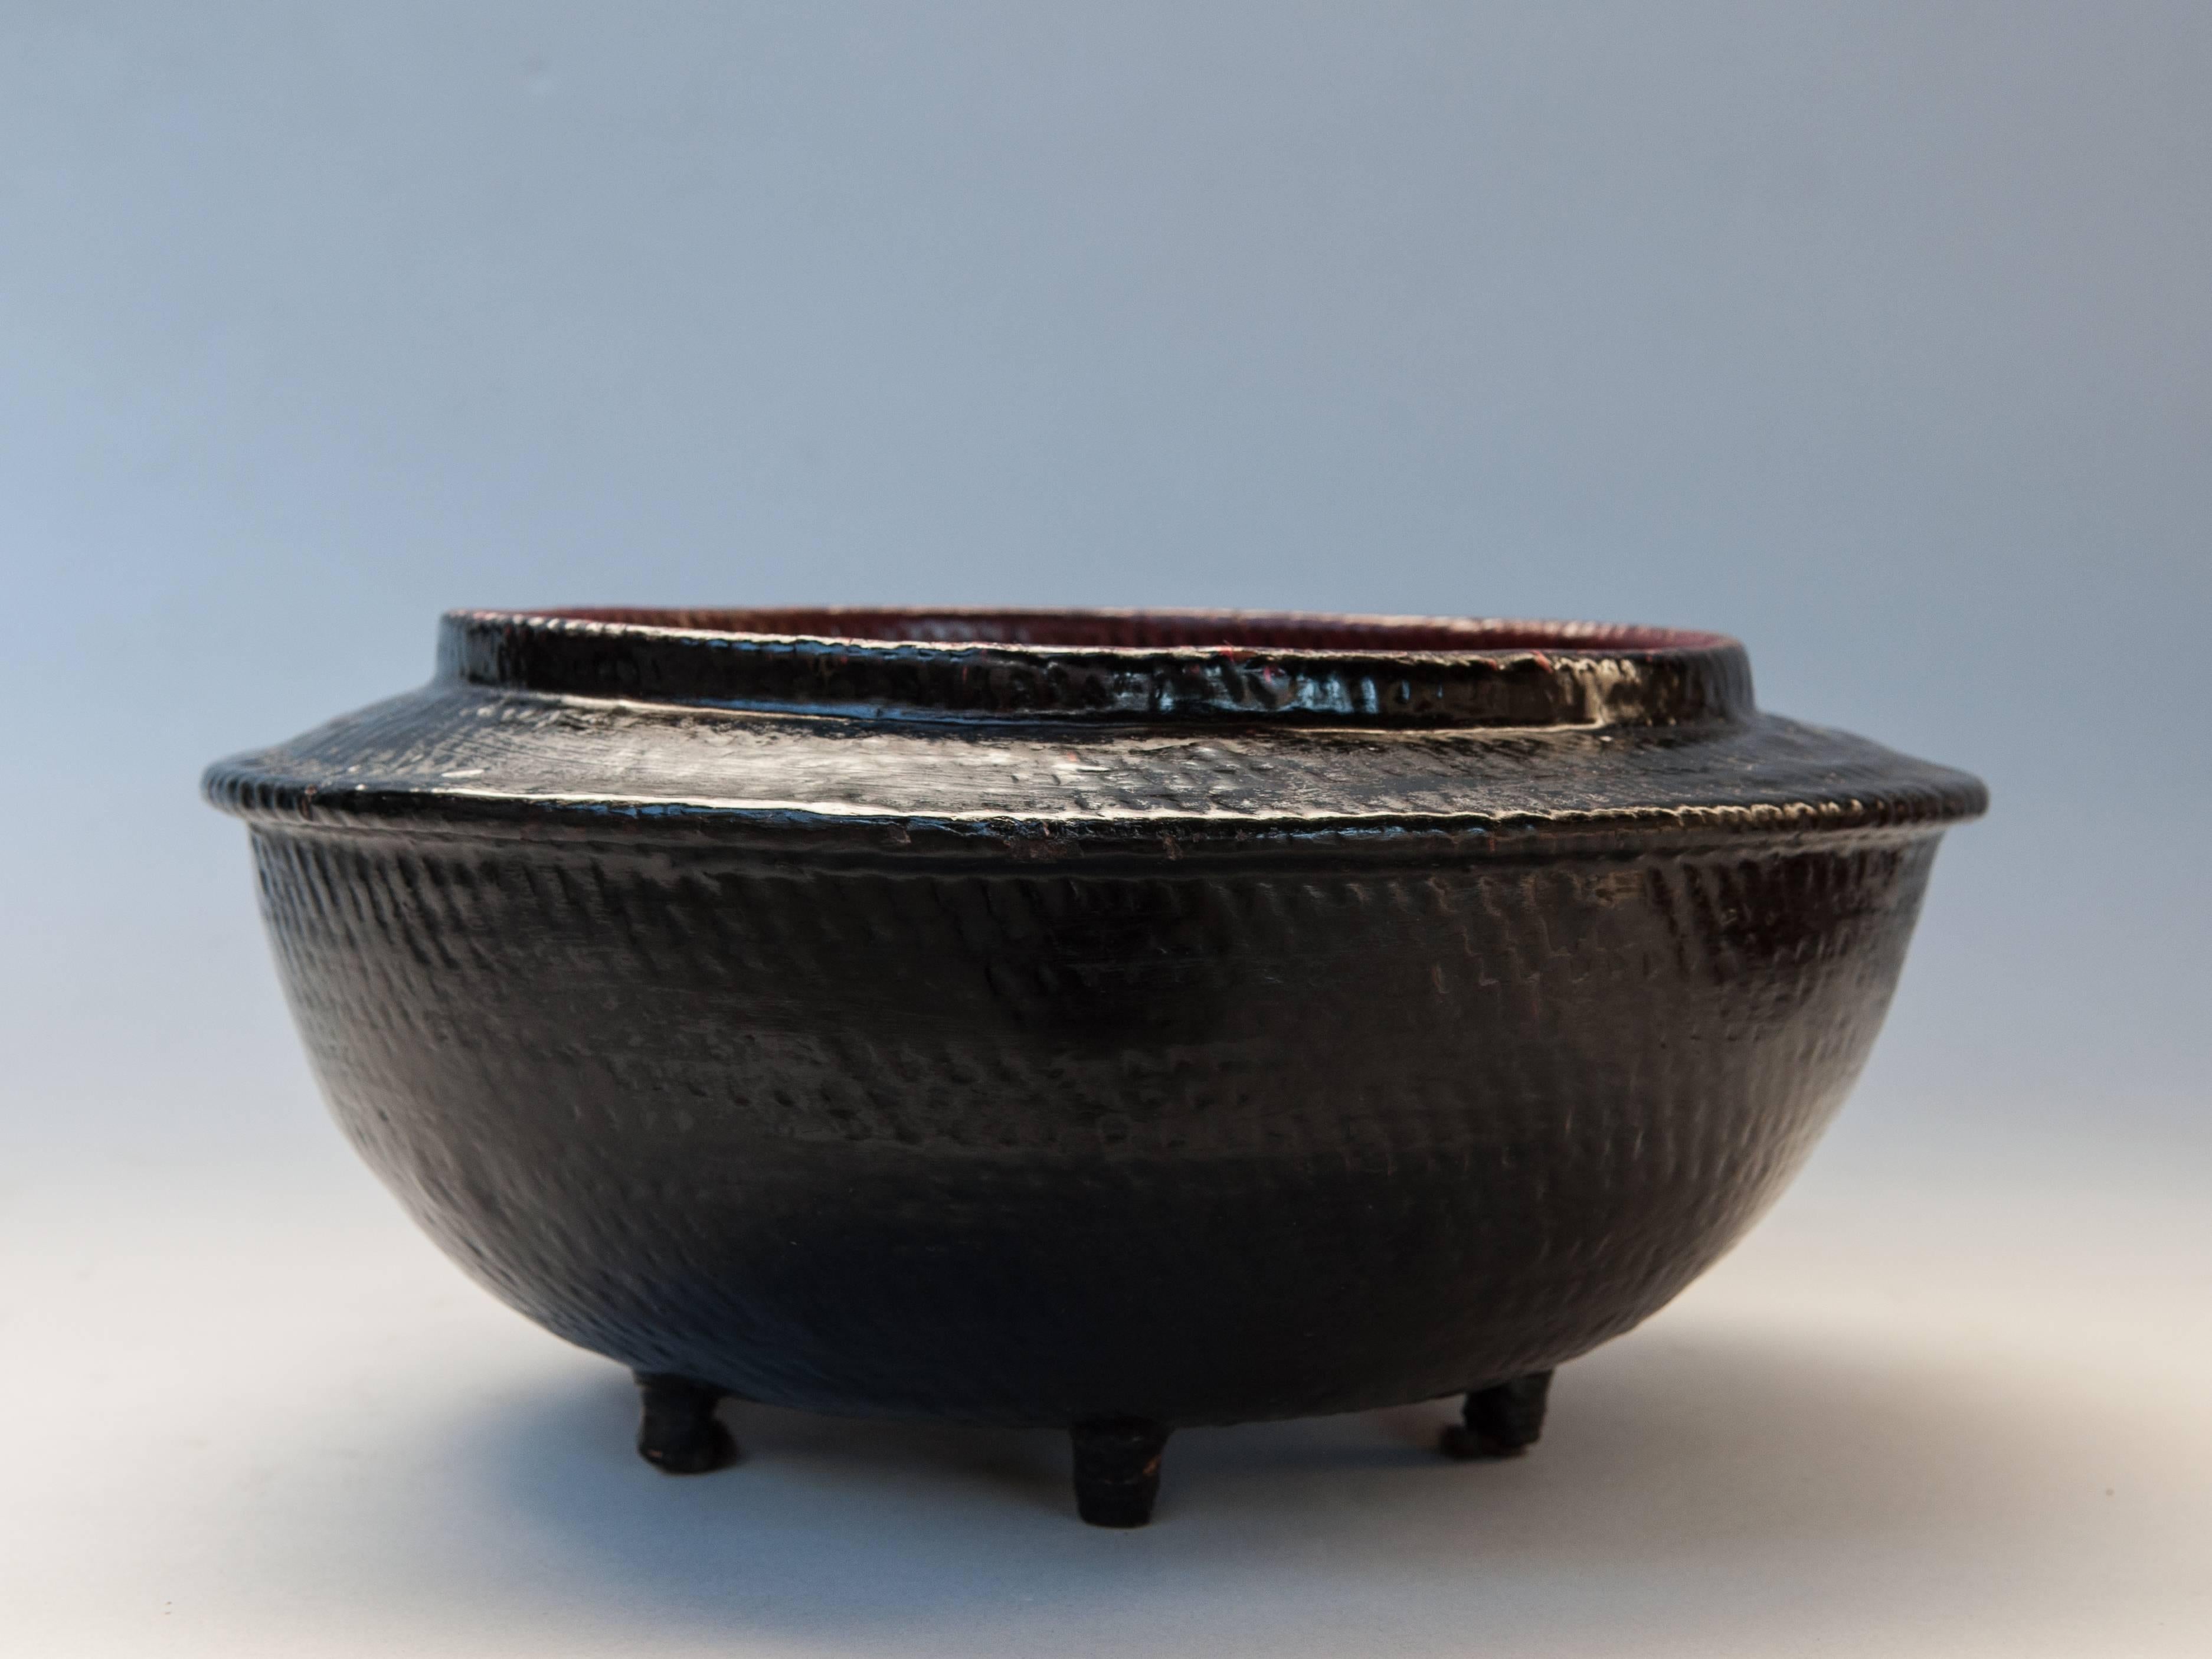 Hand-Crafted Tiered Black Lacquer Offering Vessel, Hsun Gwet, Burma Mid-20th Century, Rattan